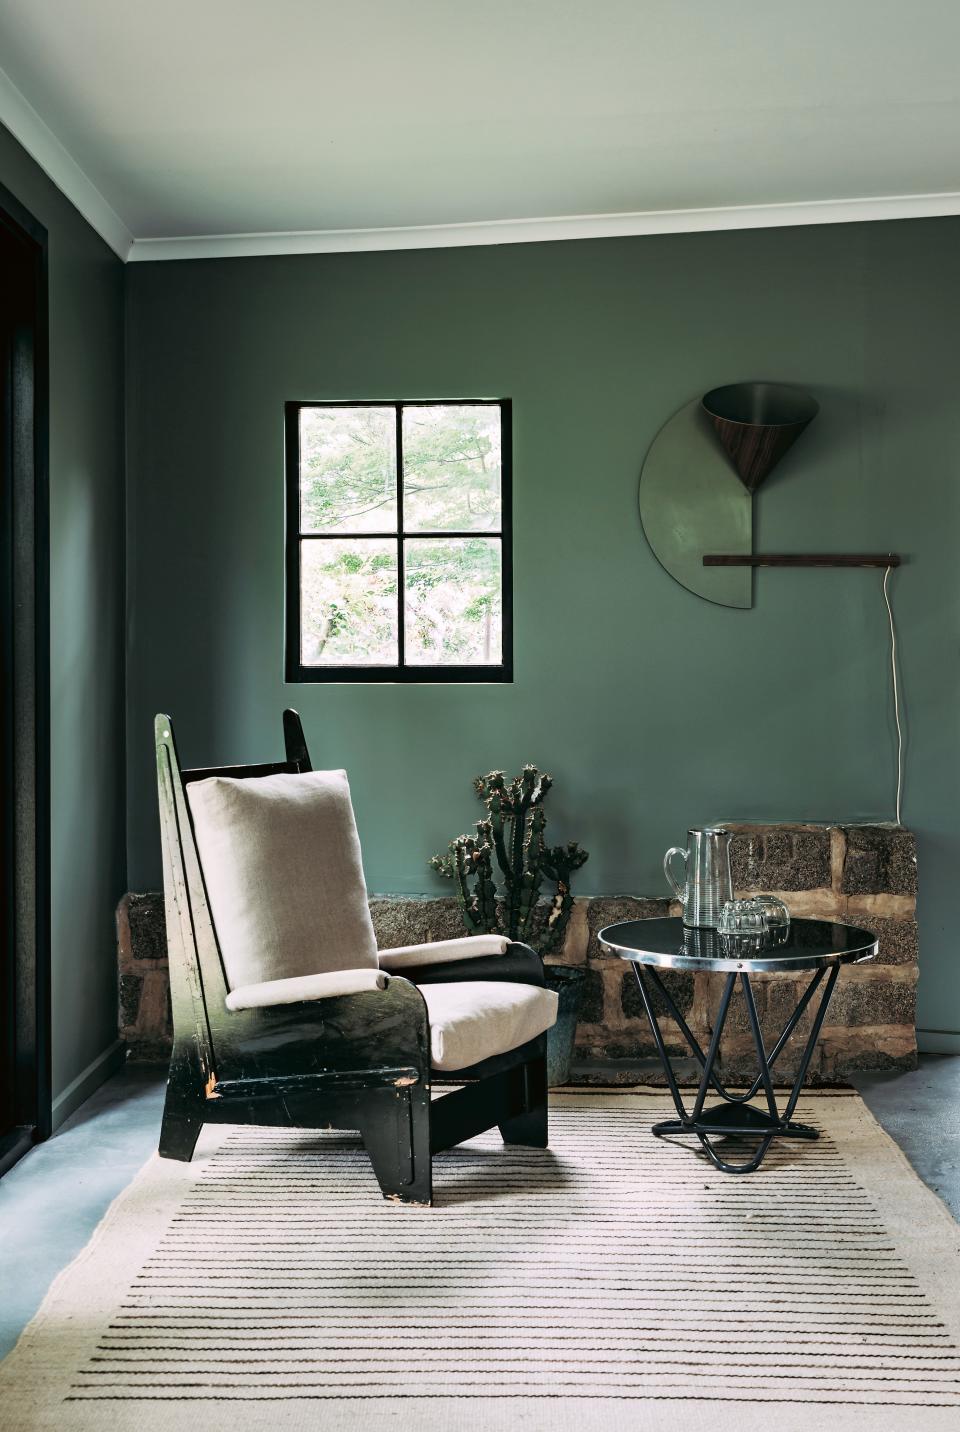 “Over ten years I have gathered objects, placed and shifted them, hung them up, taken them down, and gradually a series of decorated spaces have emerged—often with different identities,” says antiques collector Geoffrey Hatty of his house outside Melbourne, Australia. Hatty purchased this chair, attributed to Francis Jourdain, at auction in Paris. “This is a place of marvelous rejections, of pieces that I know to be great, but for whom I have never found the right buyer. It has developed as things failed, and so isn’t one look. I don’t like to be pigeonholed, but rather, try to find the virtue in a wide range of things.”